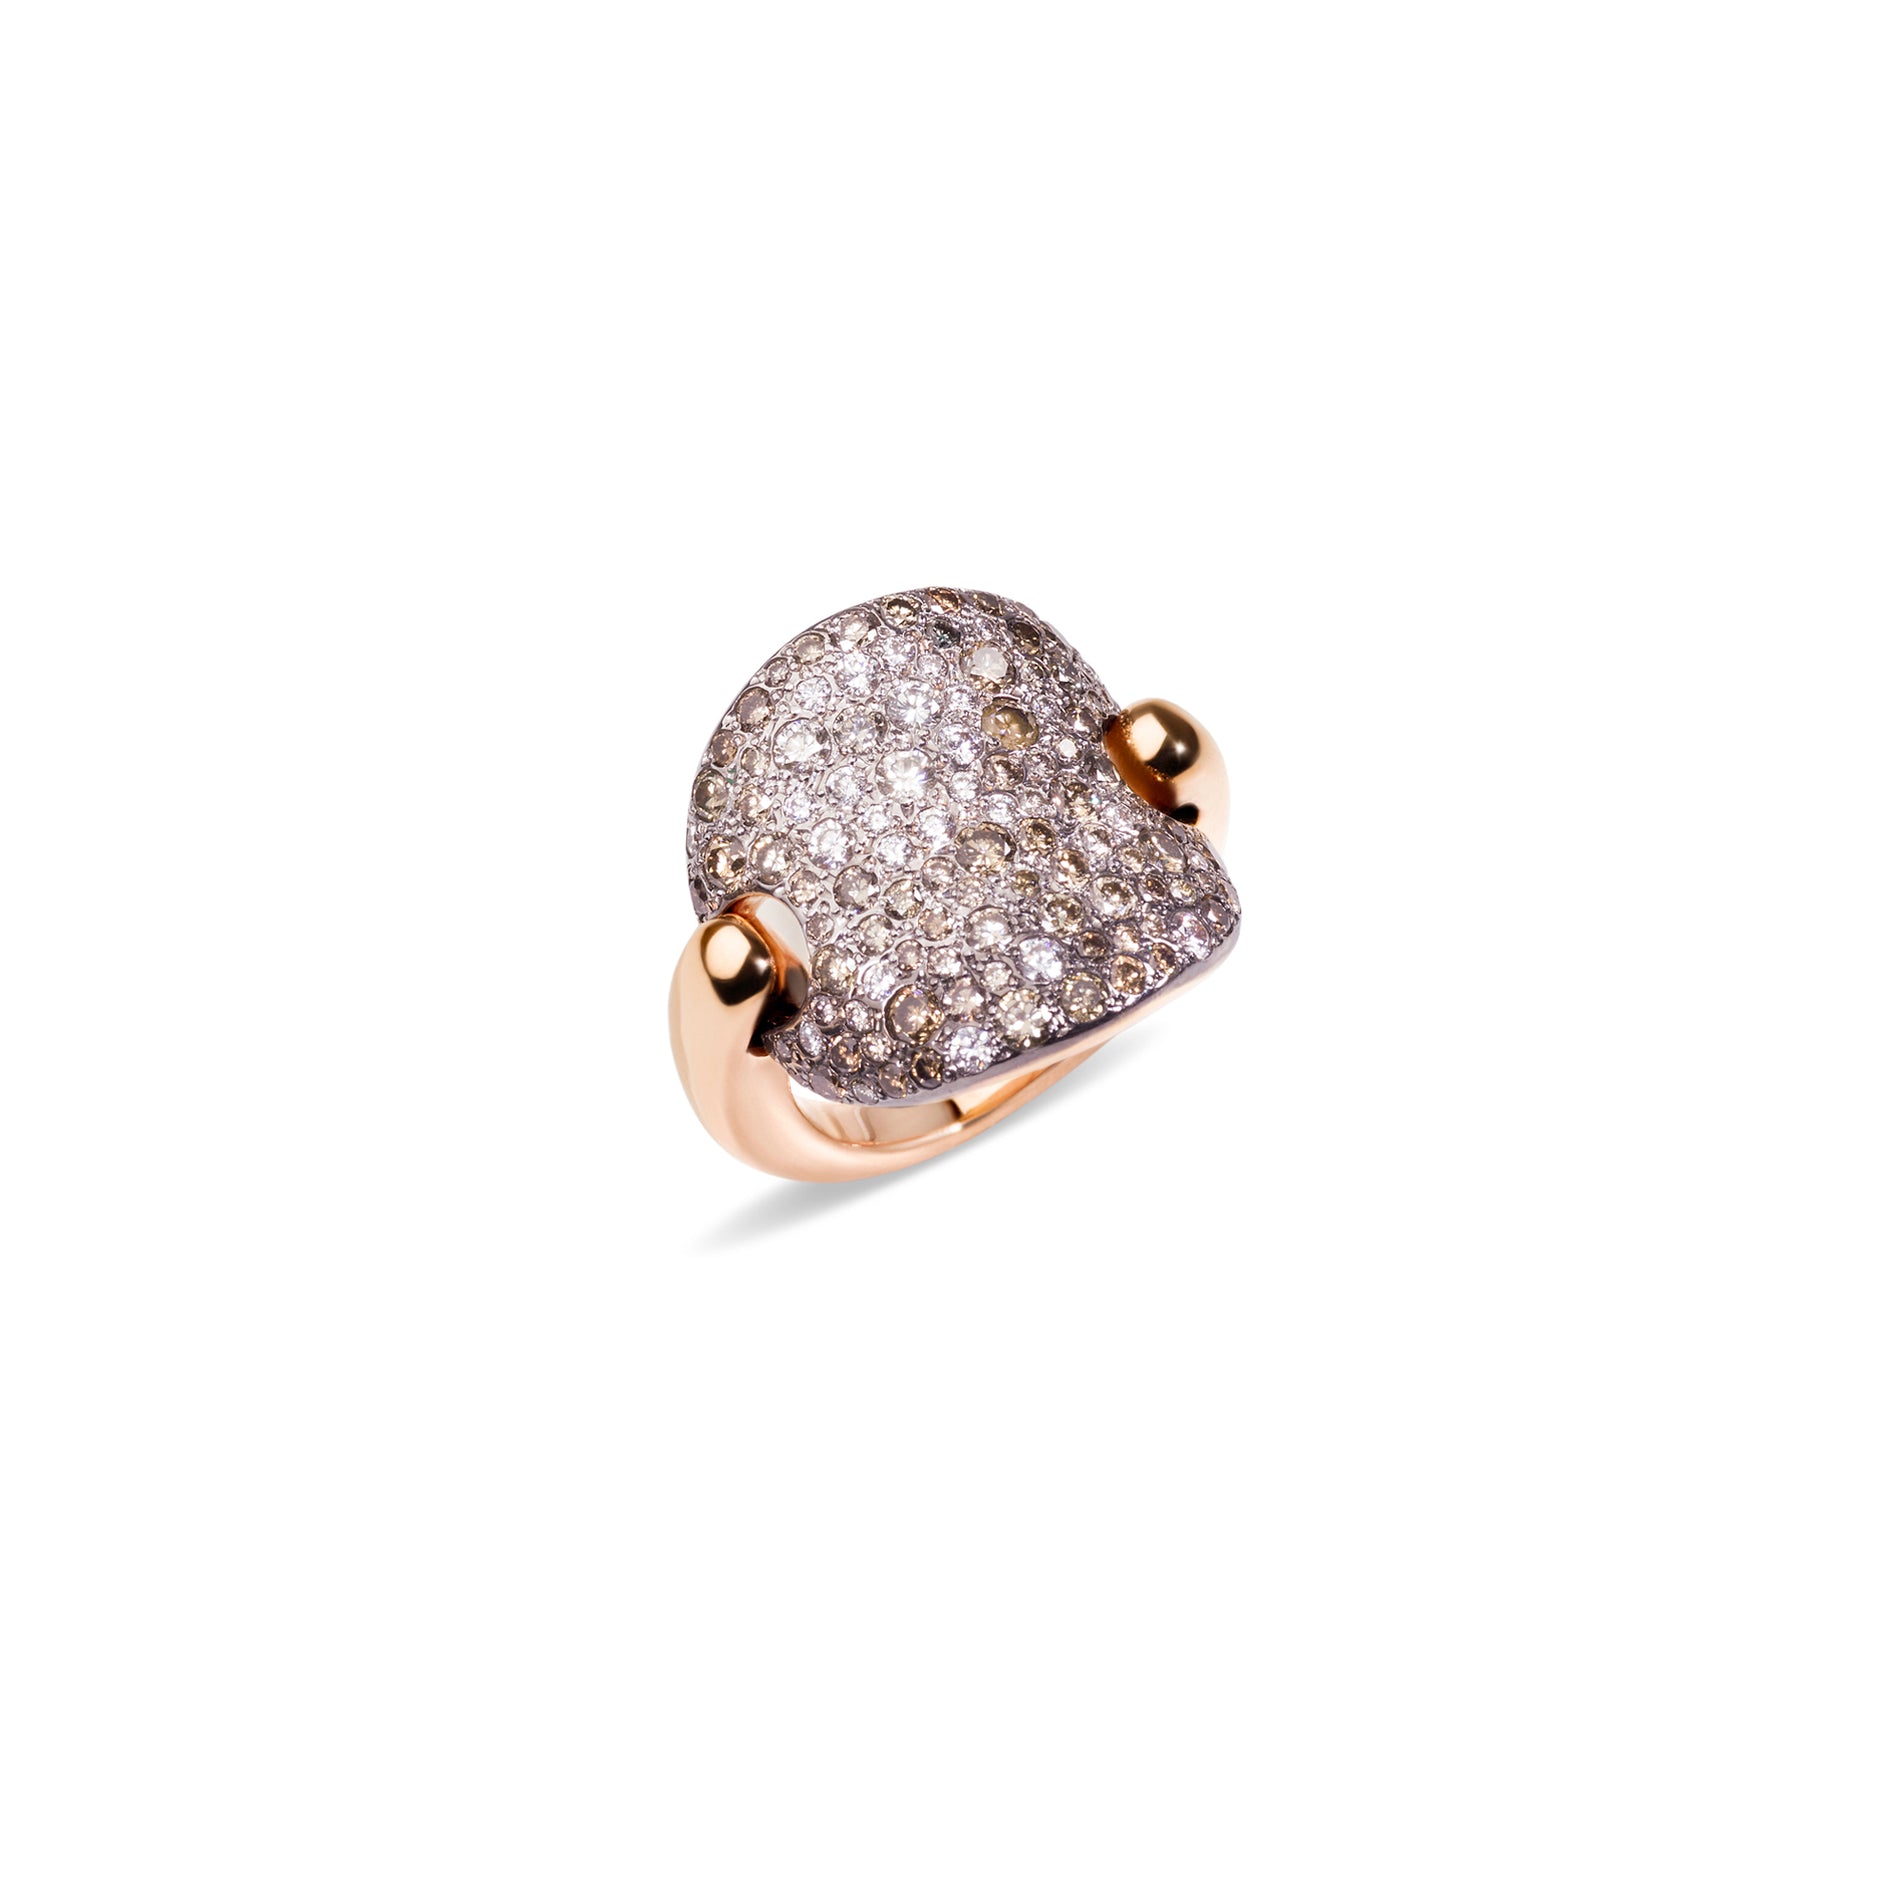 Sabbia Ring in 18k Rose Gold with Brown and White Diamonds - Orsini Jewellers NZ